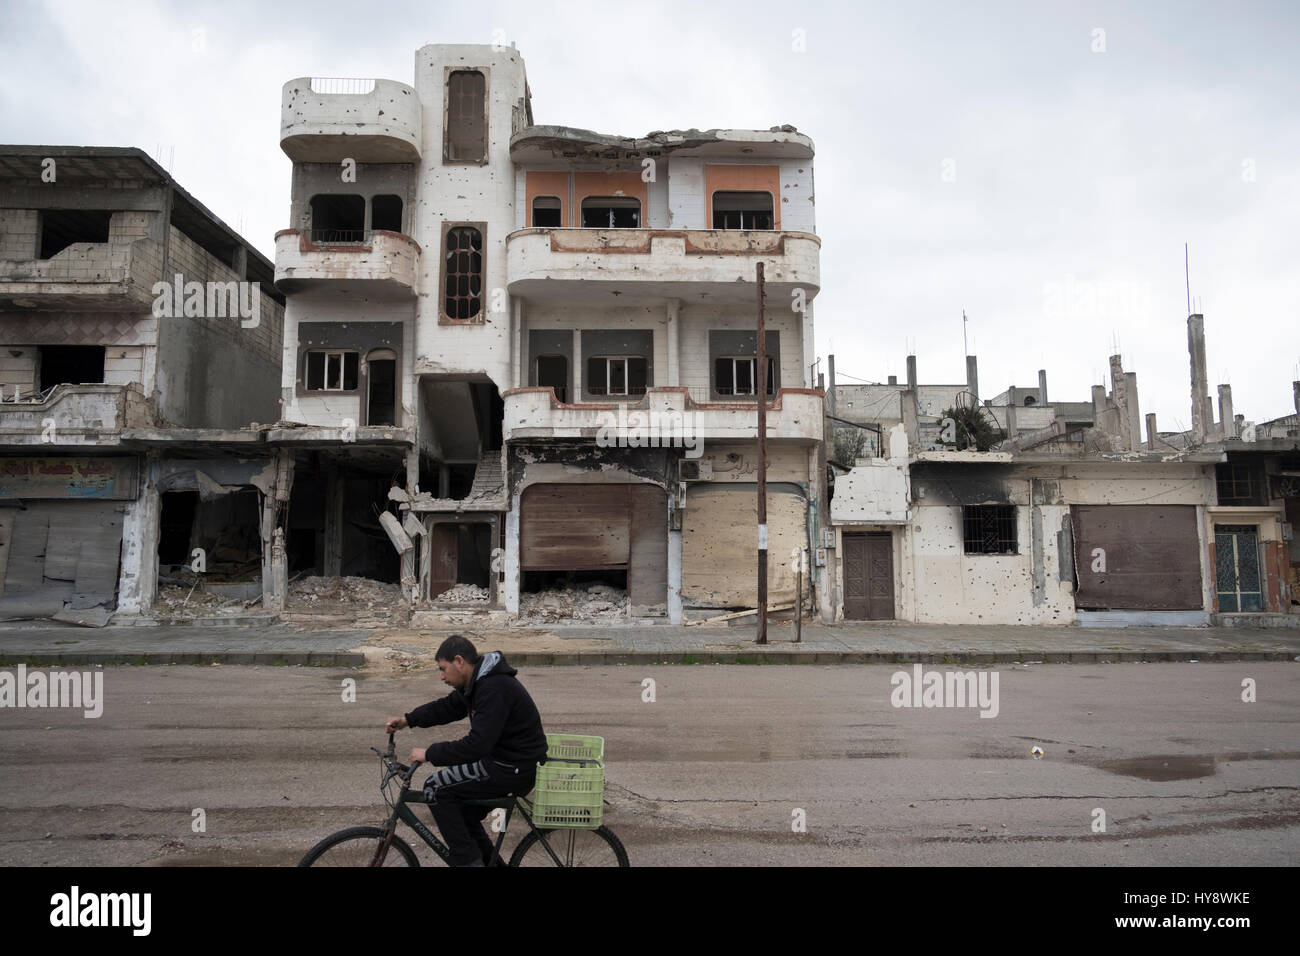 Bicycler in distressed district Baba Amr in Homs, Syria in early 2017 Stock Photo